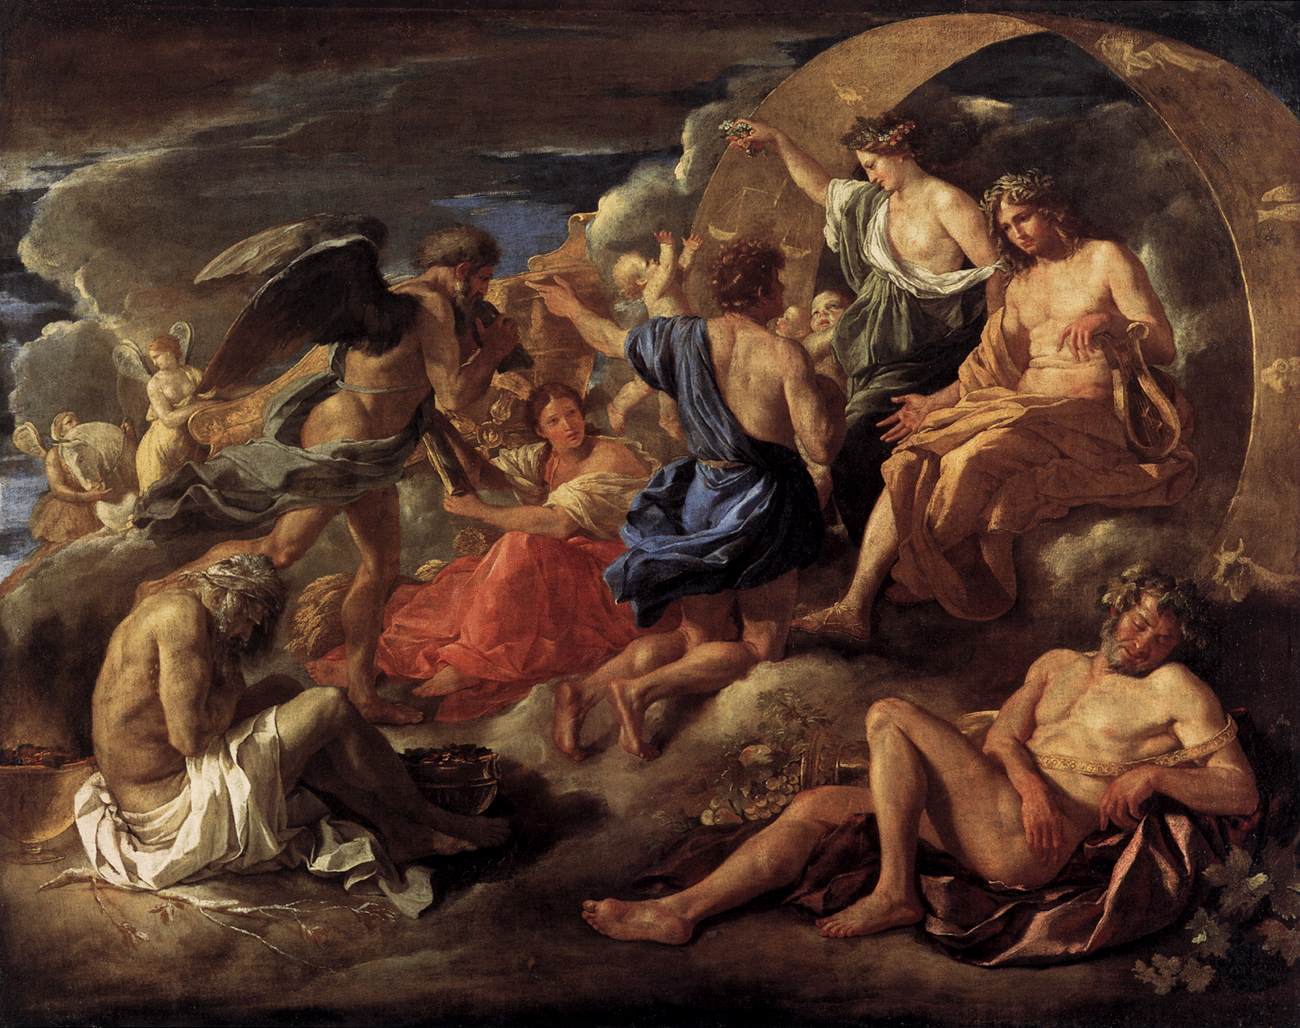 https://upload.wikimedia.org/wikipedia/commons/e/e3/Nicolas_Poussin_-_Helios_and_Phaeton_with_Saturn_and_the_Four_Seasons.jpg